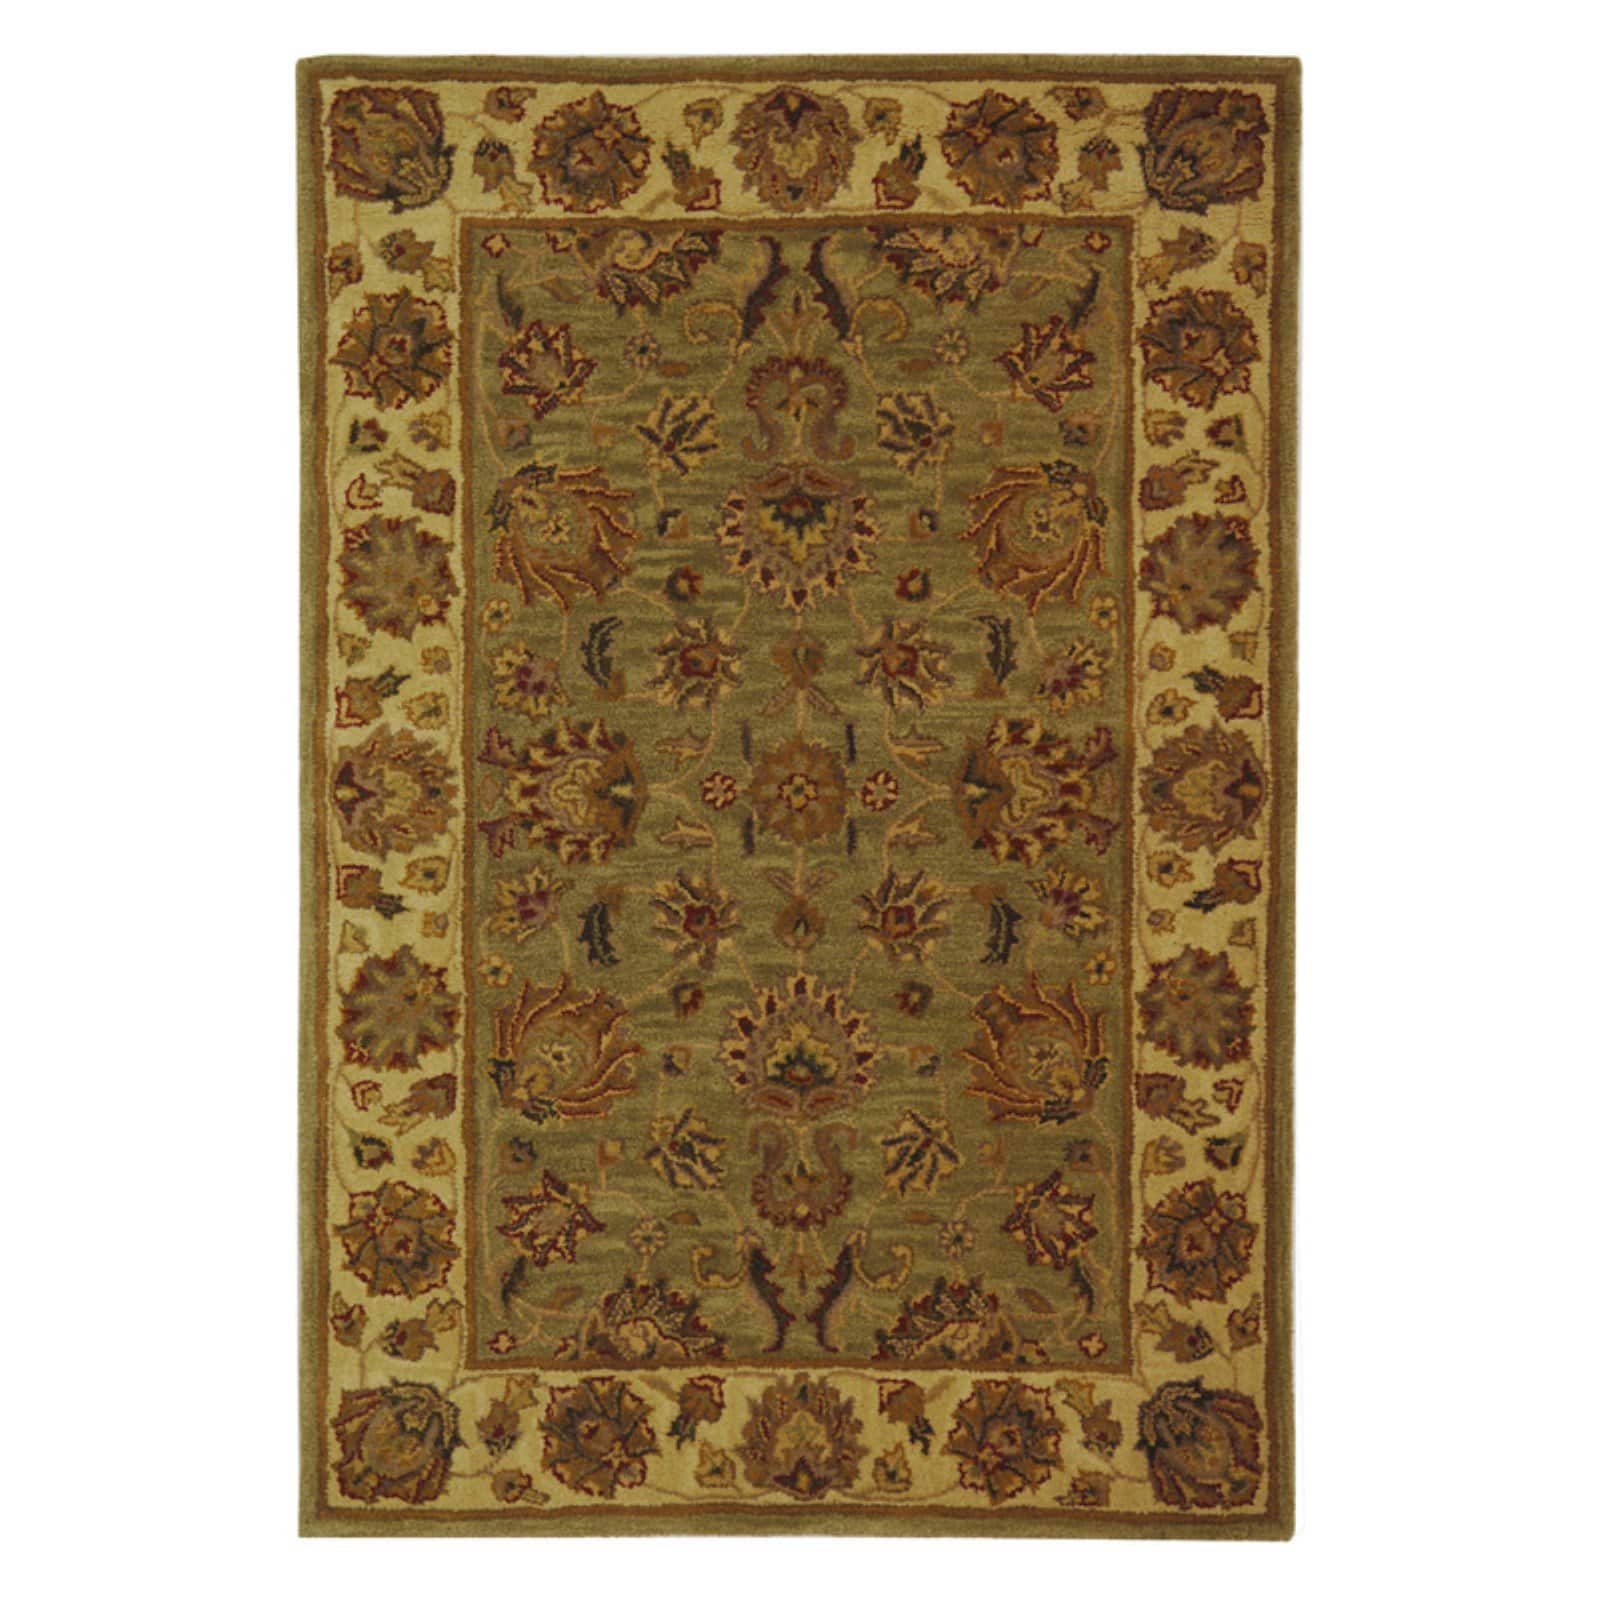 SAFAVIEH Heritage Regis Traditional Wool Area Rug, Green/Gold, 3'6" x 3'6" Round - image 5 of 10